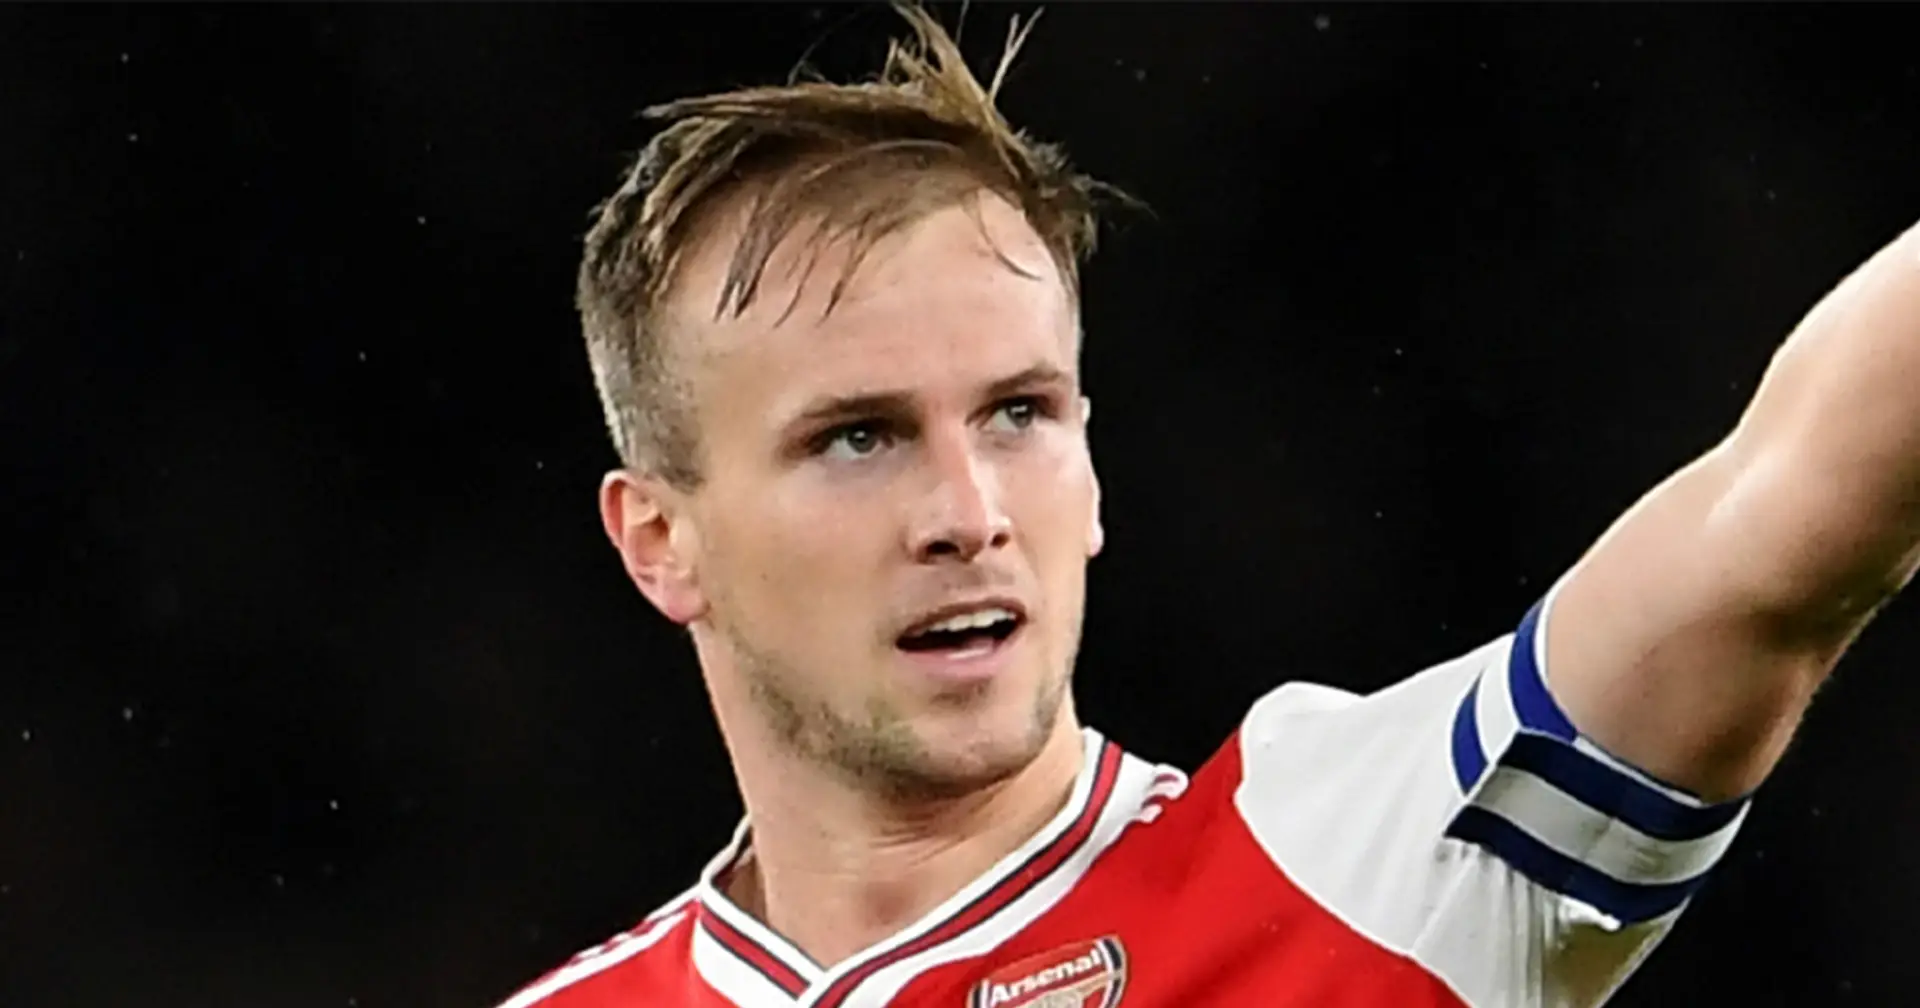 'He is very military in style in terms of timings': Rob Holding explains how his father helped him form discipline habits